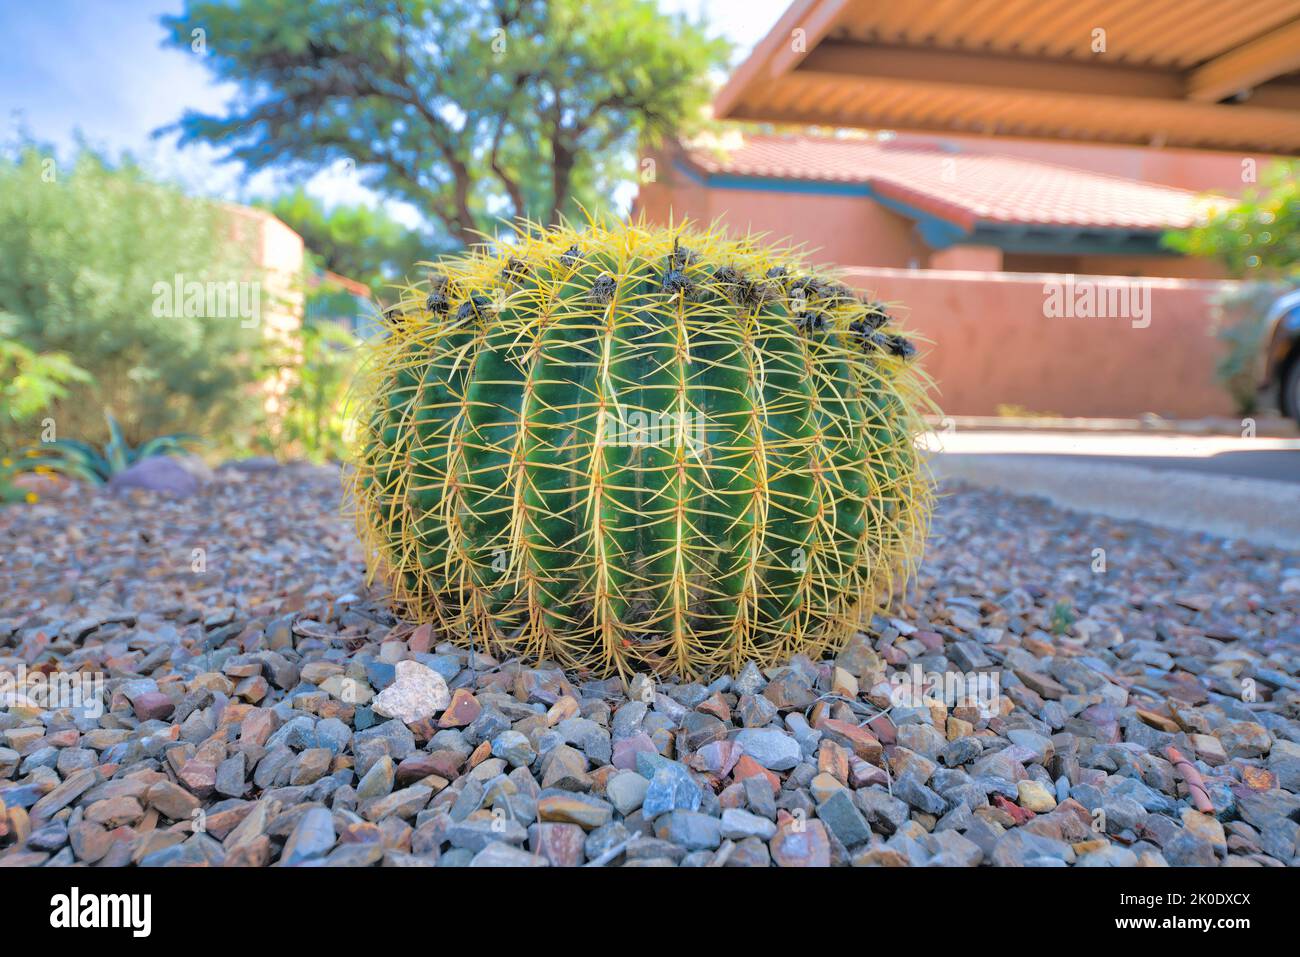 Round barrel cactus on a gravel outside the residences in Tucson, Arizona. Close-up of a round cactus against the blurred images of trees and plants n Stock Photo